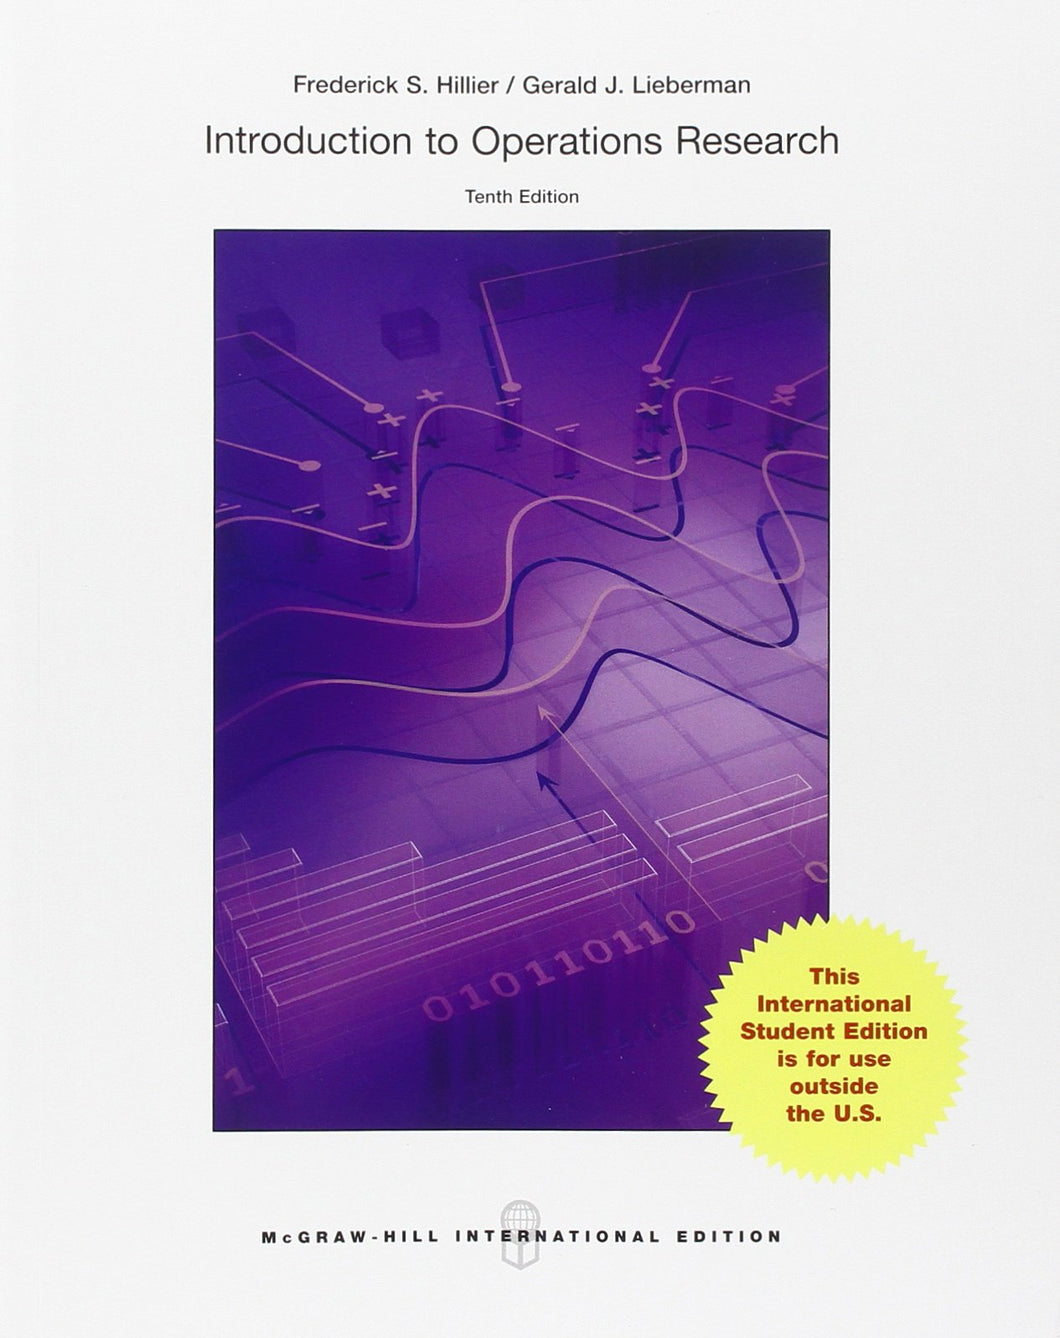 Introduction to Operations Research (with Access Card for Premium Content) [Paperback] 10e by Hillier - Smiling Bookstore